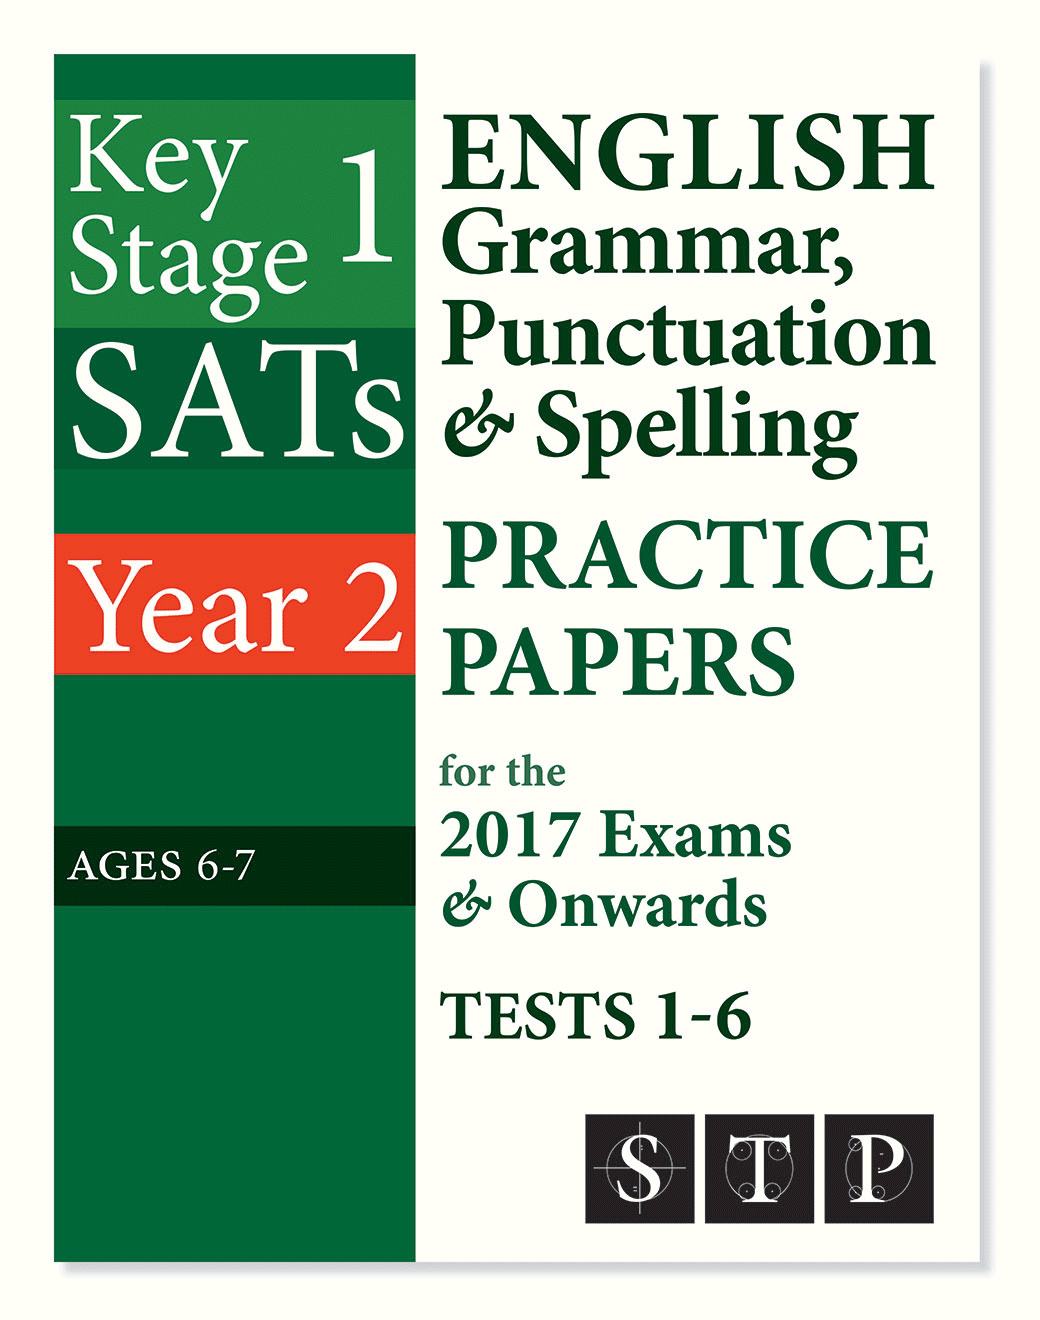 KS1 SATs English Grammar, Punctuation & Spelling Practice Papers for the 2017 Exams & Onwards Tests 1-6. Click here to see inside!